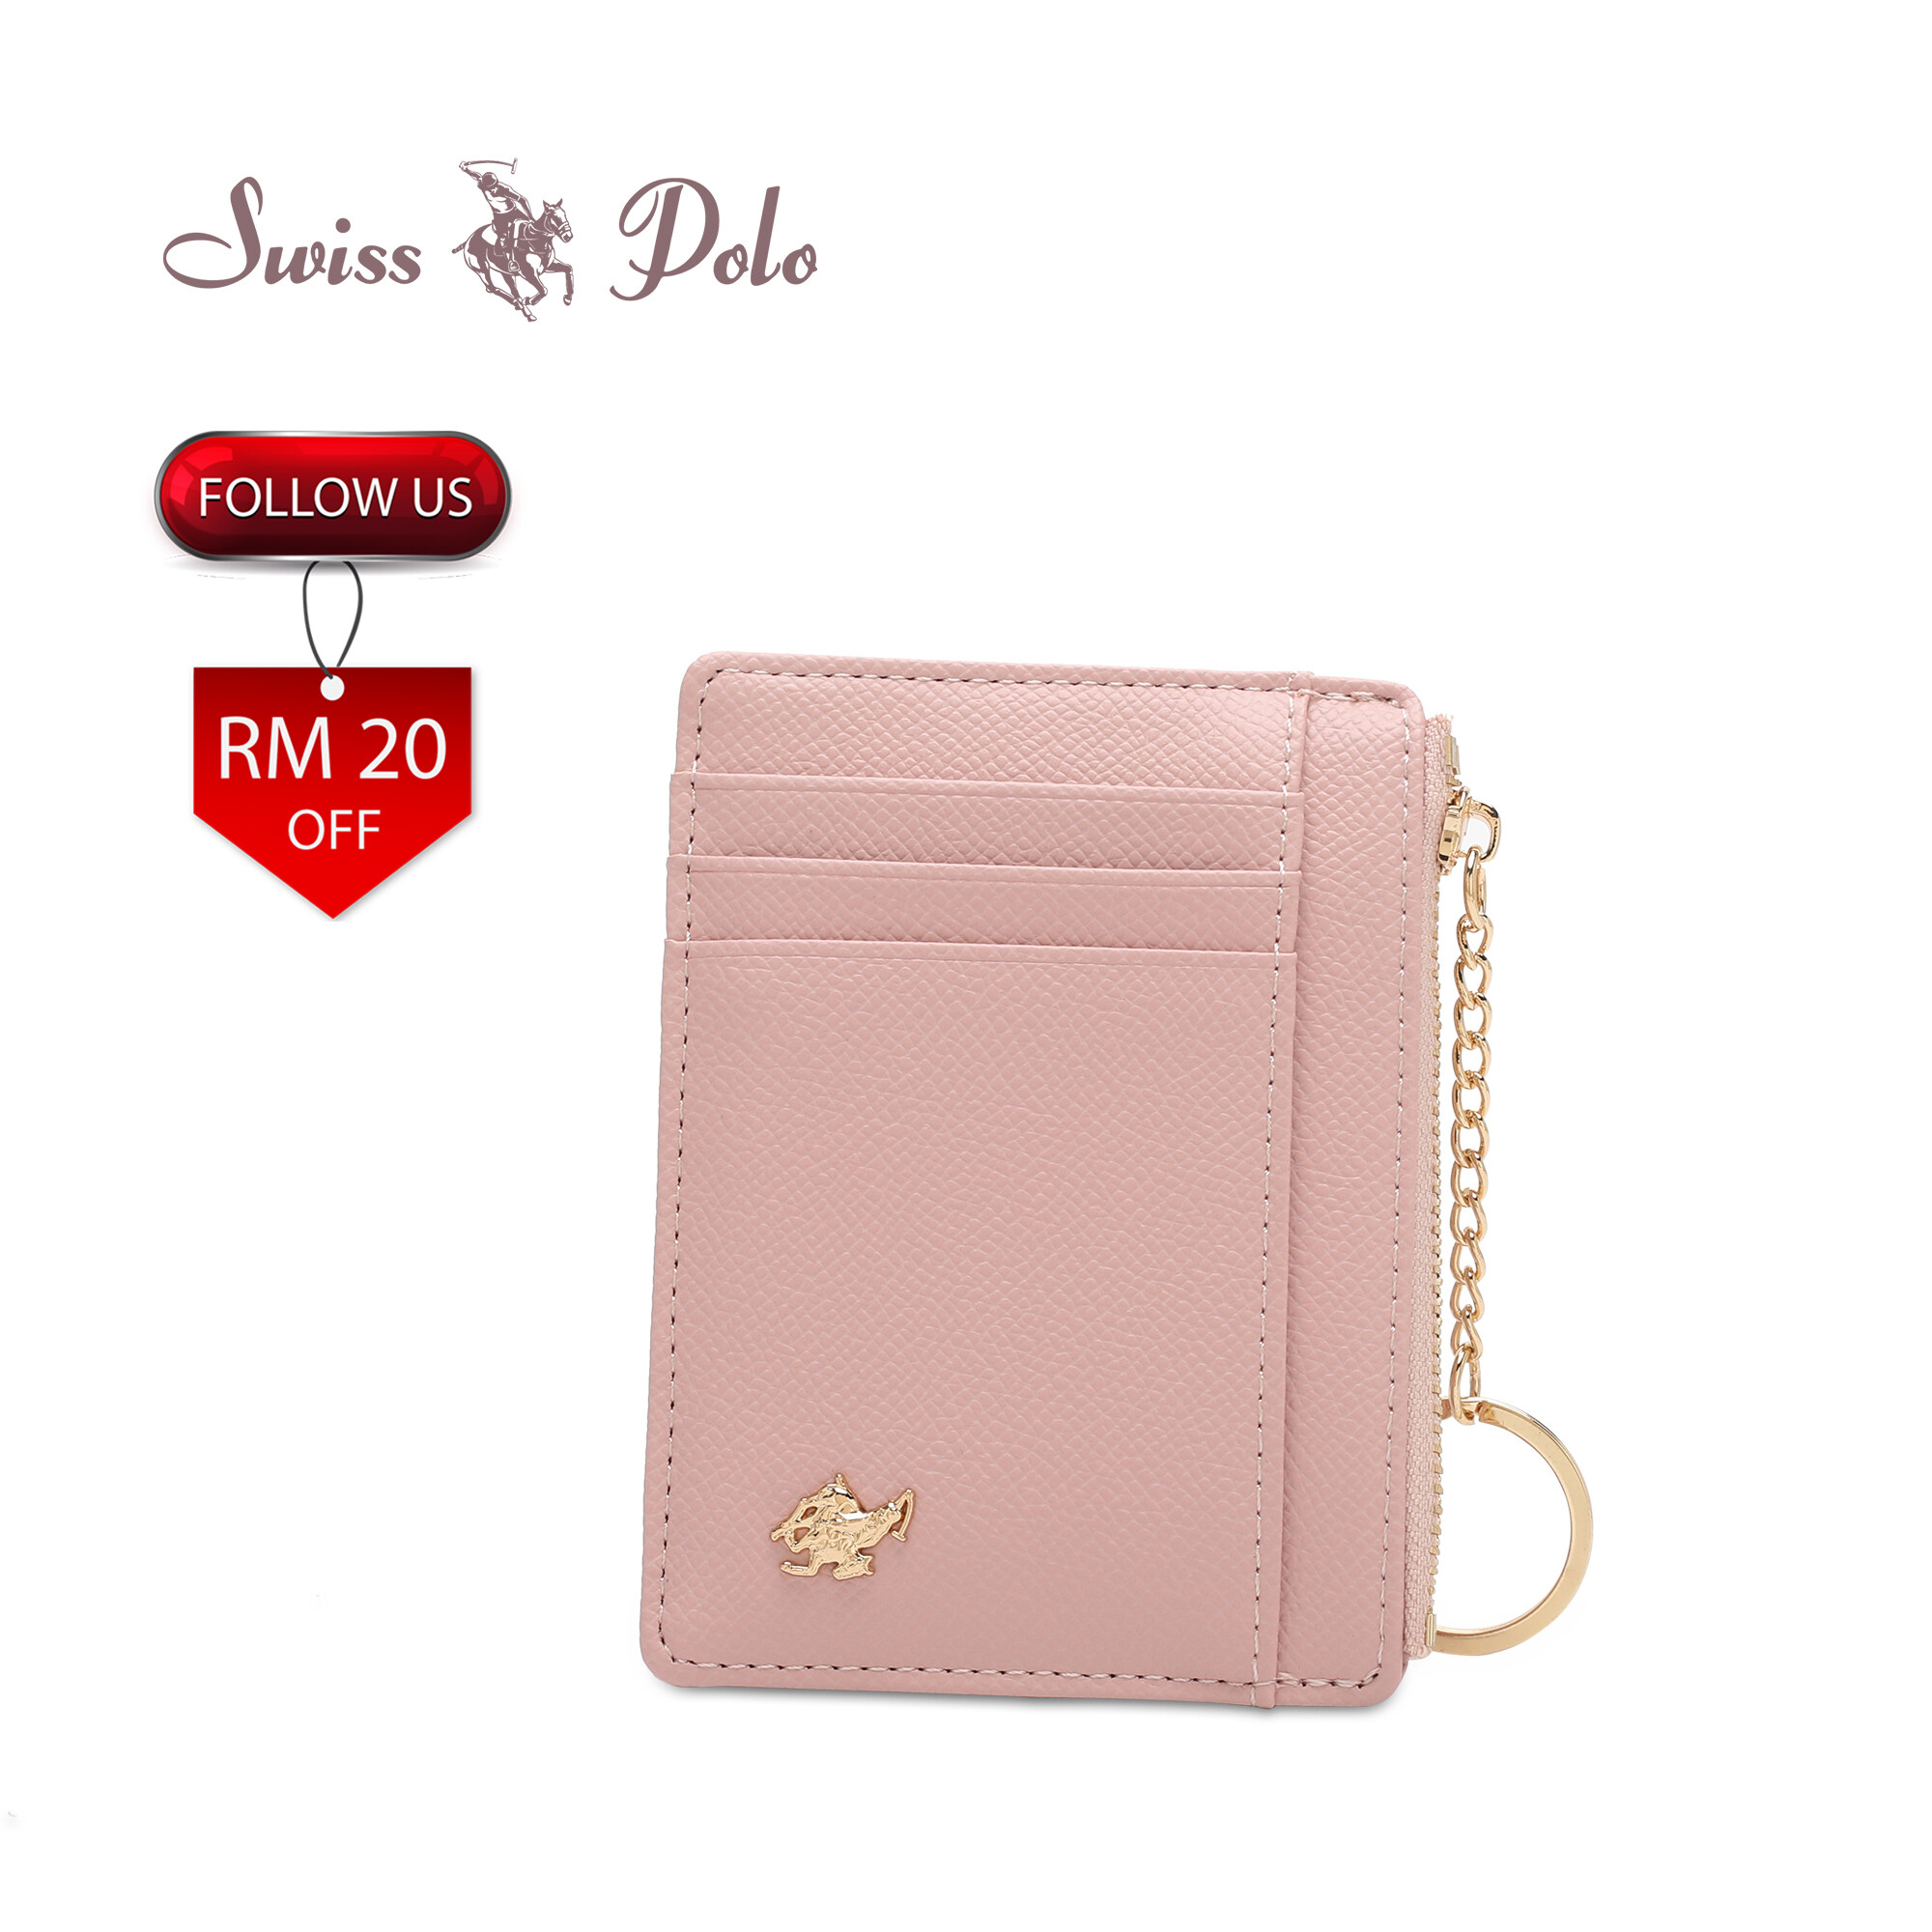 SWISS POLO Ladies Coin/Card Holder SLP 32-3 PINK